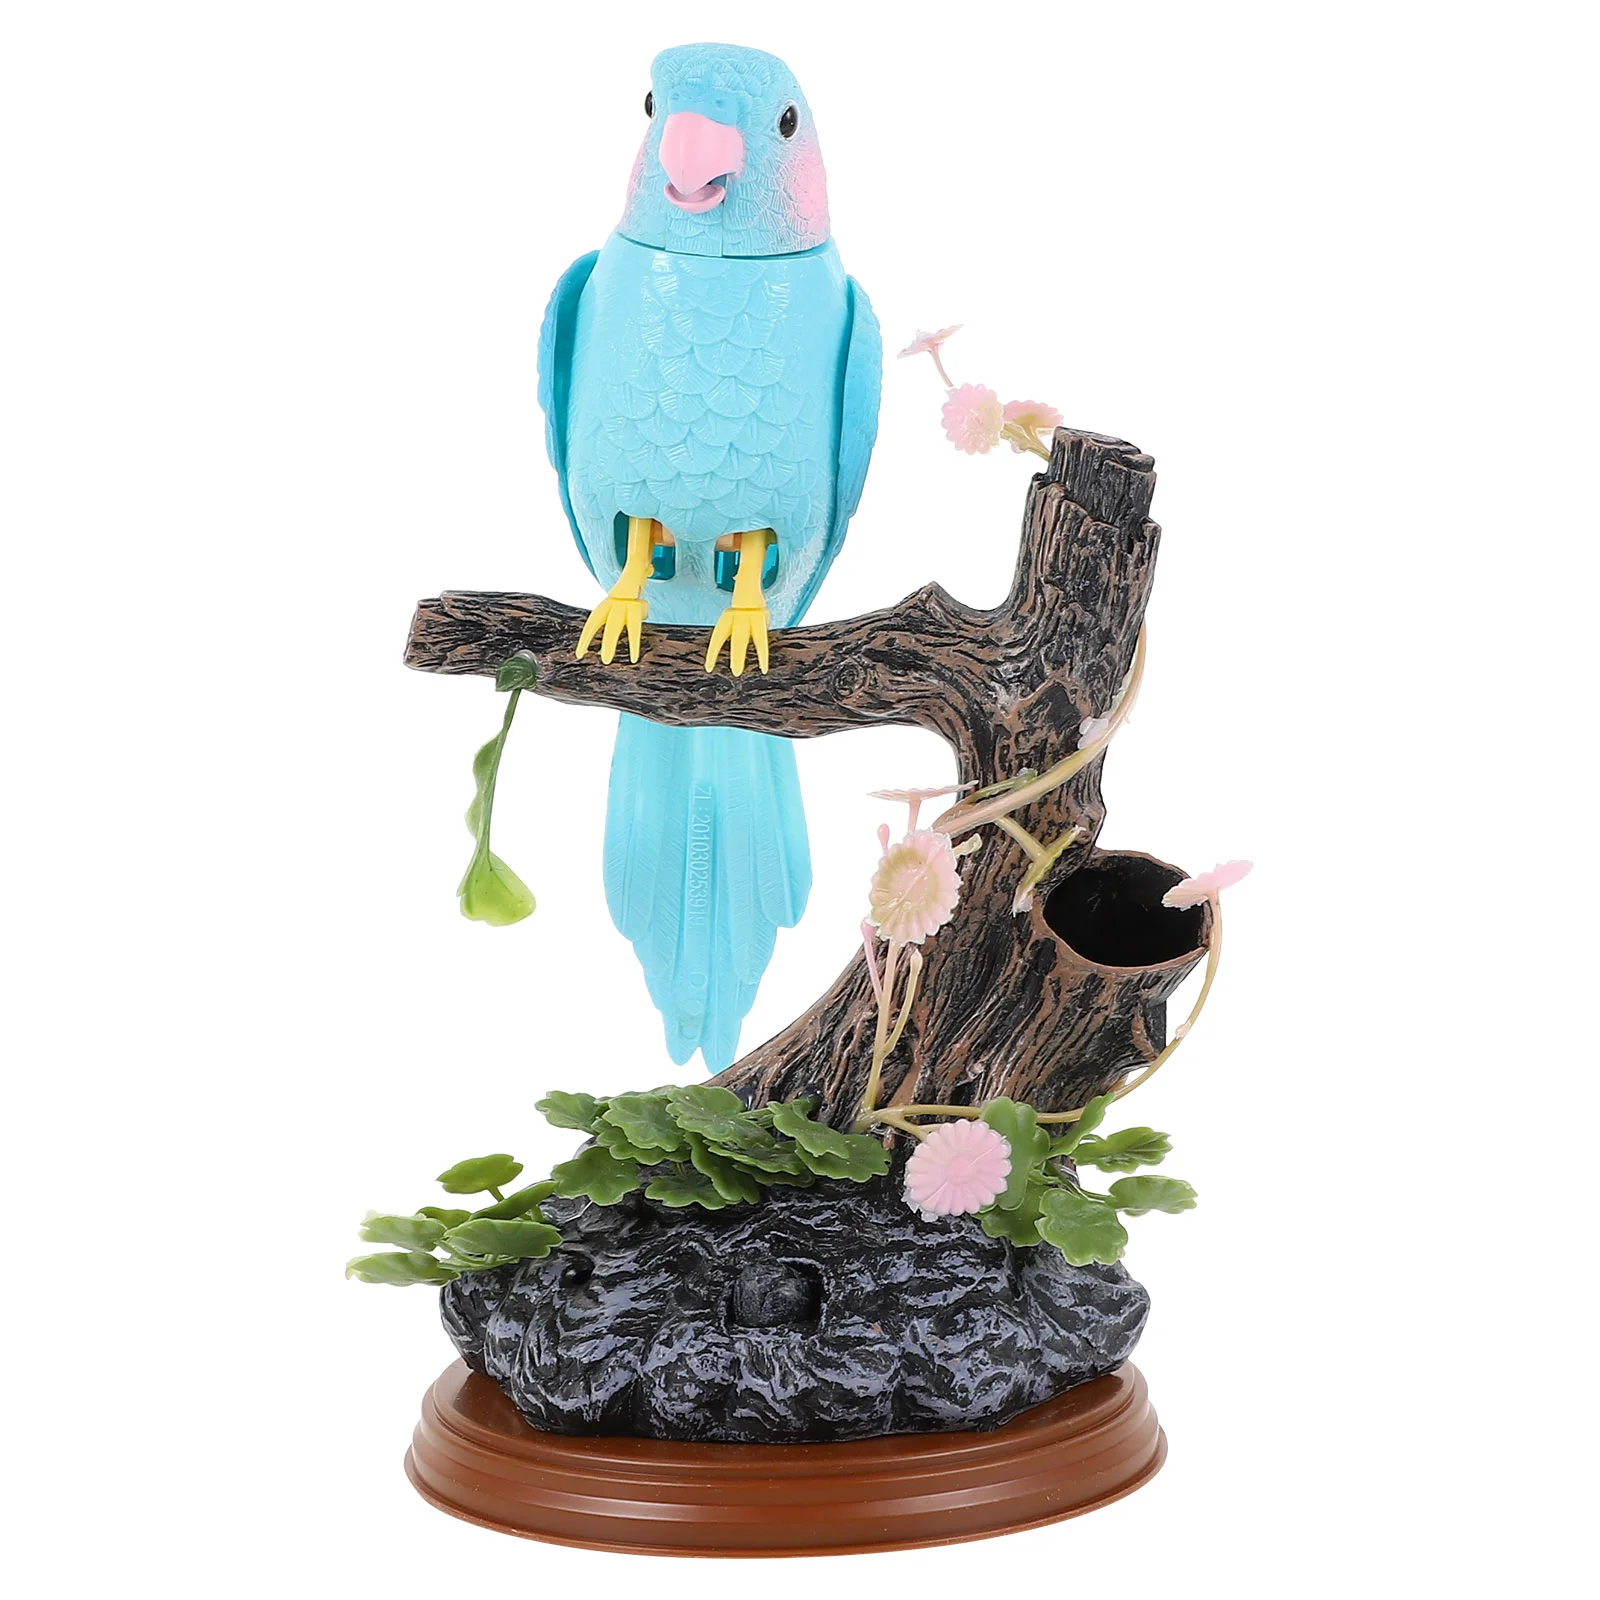 

Parrot Toy Talking Bird Recording Kids Birds Speaking Toys Electronic Repeating You Repeats Animal Repeat Say What Imitation